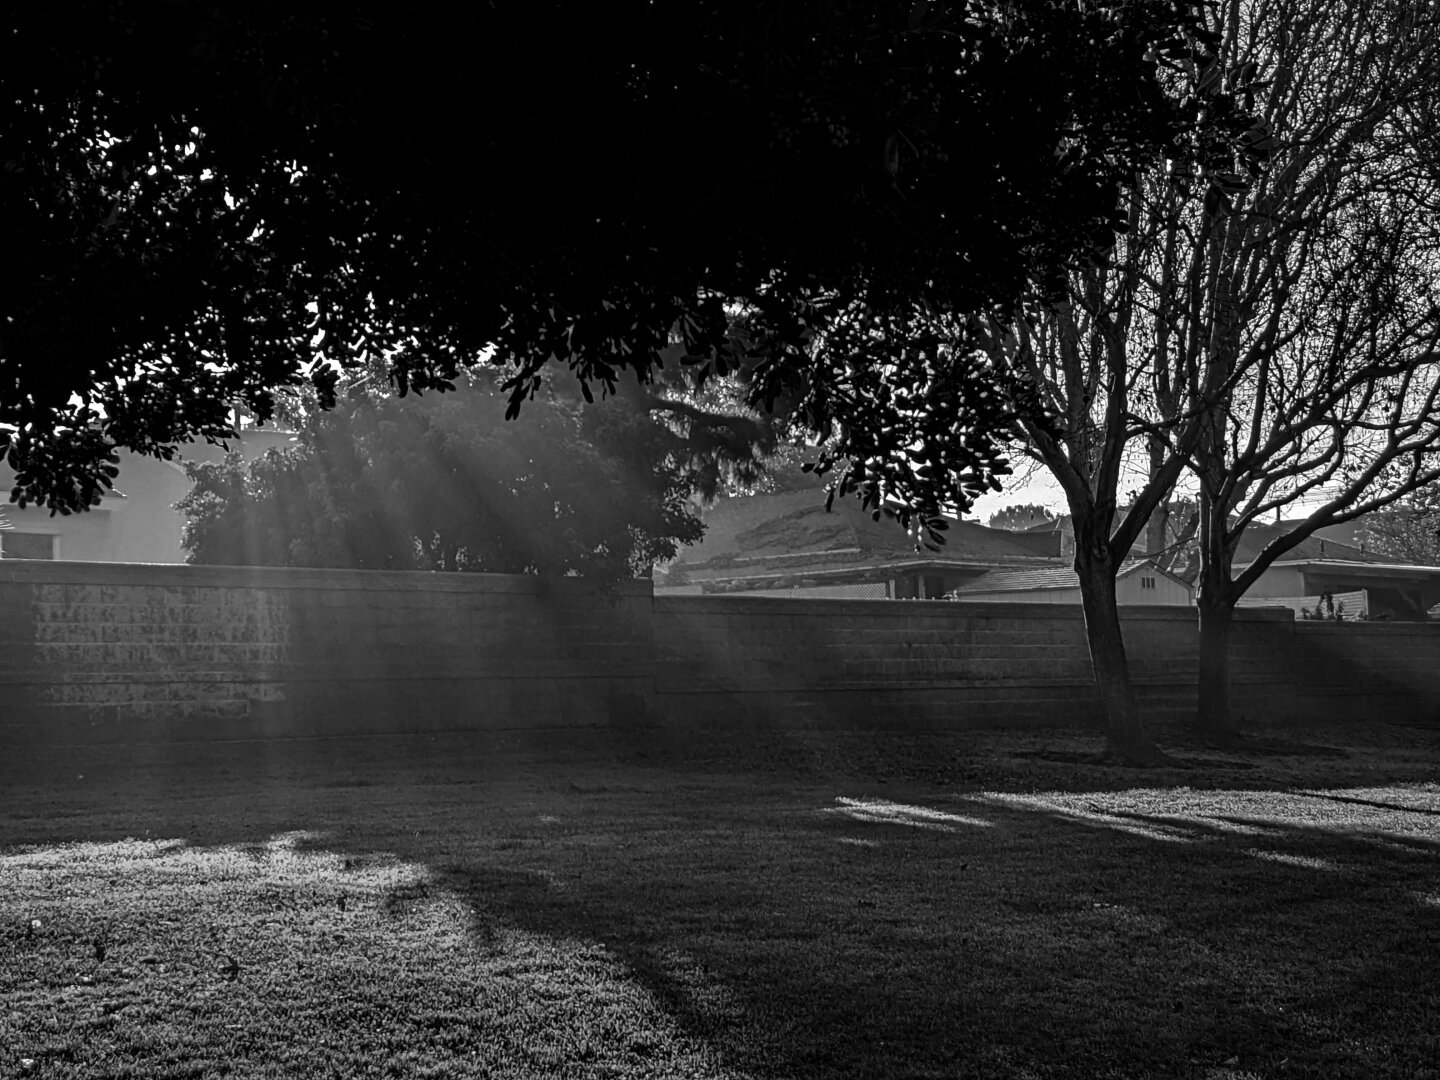 Thought I'd try a black-and-white edit of the sunbeams in the park. I kinda like it! #sunbeam #trees #park